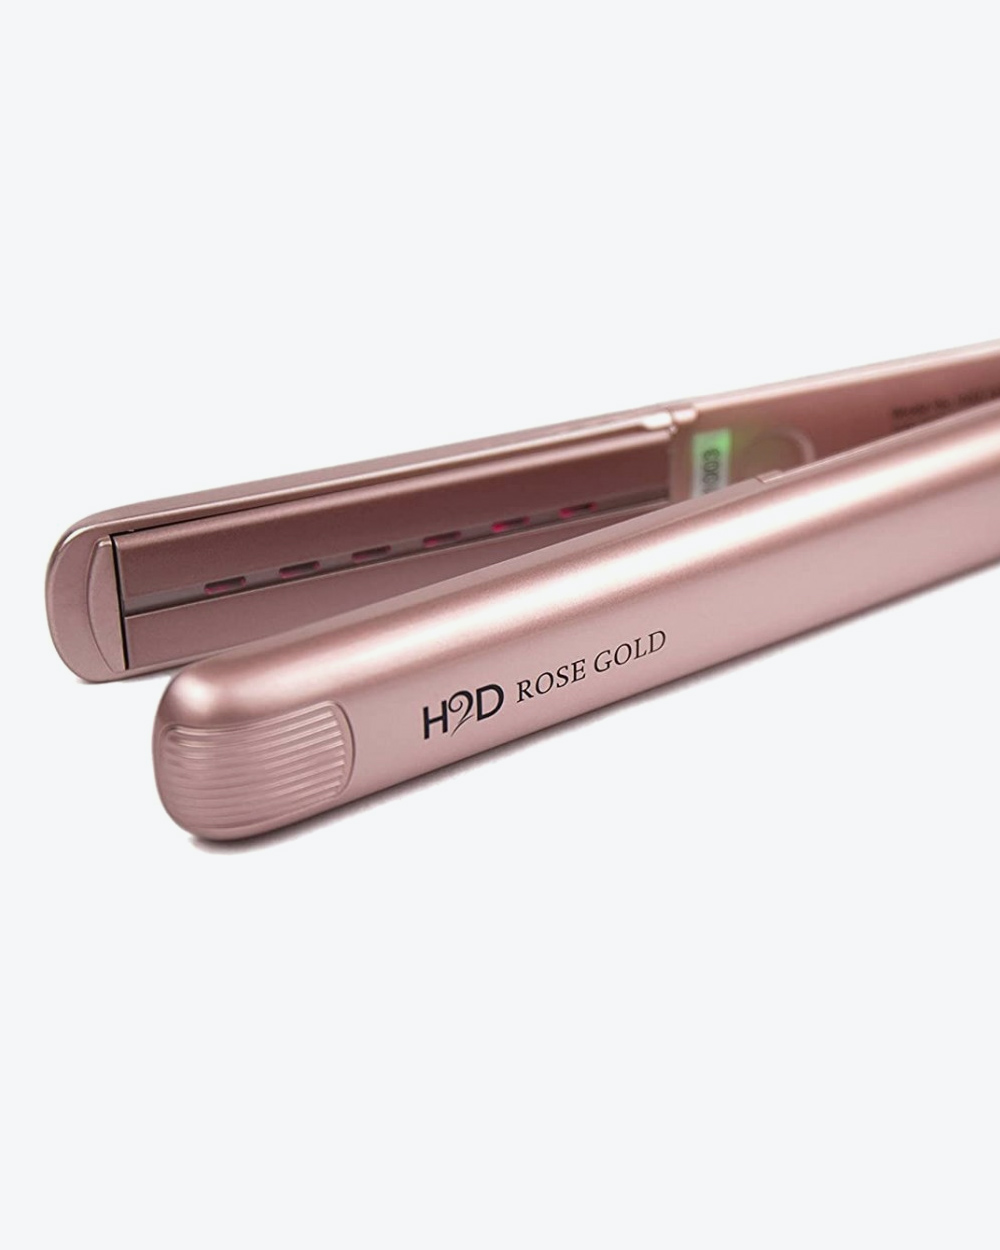 H2D VI ROSE GOLD HAIR STRAIGHTENERS / Now £